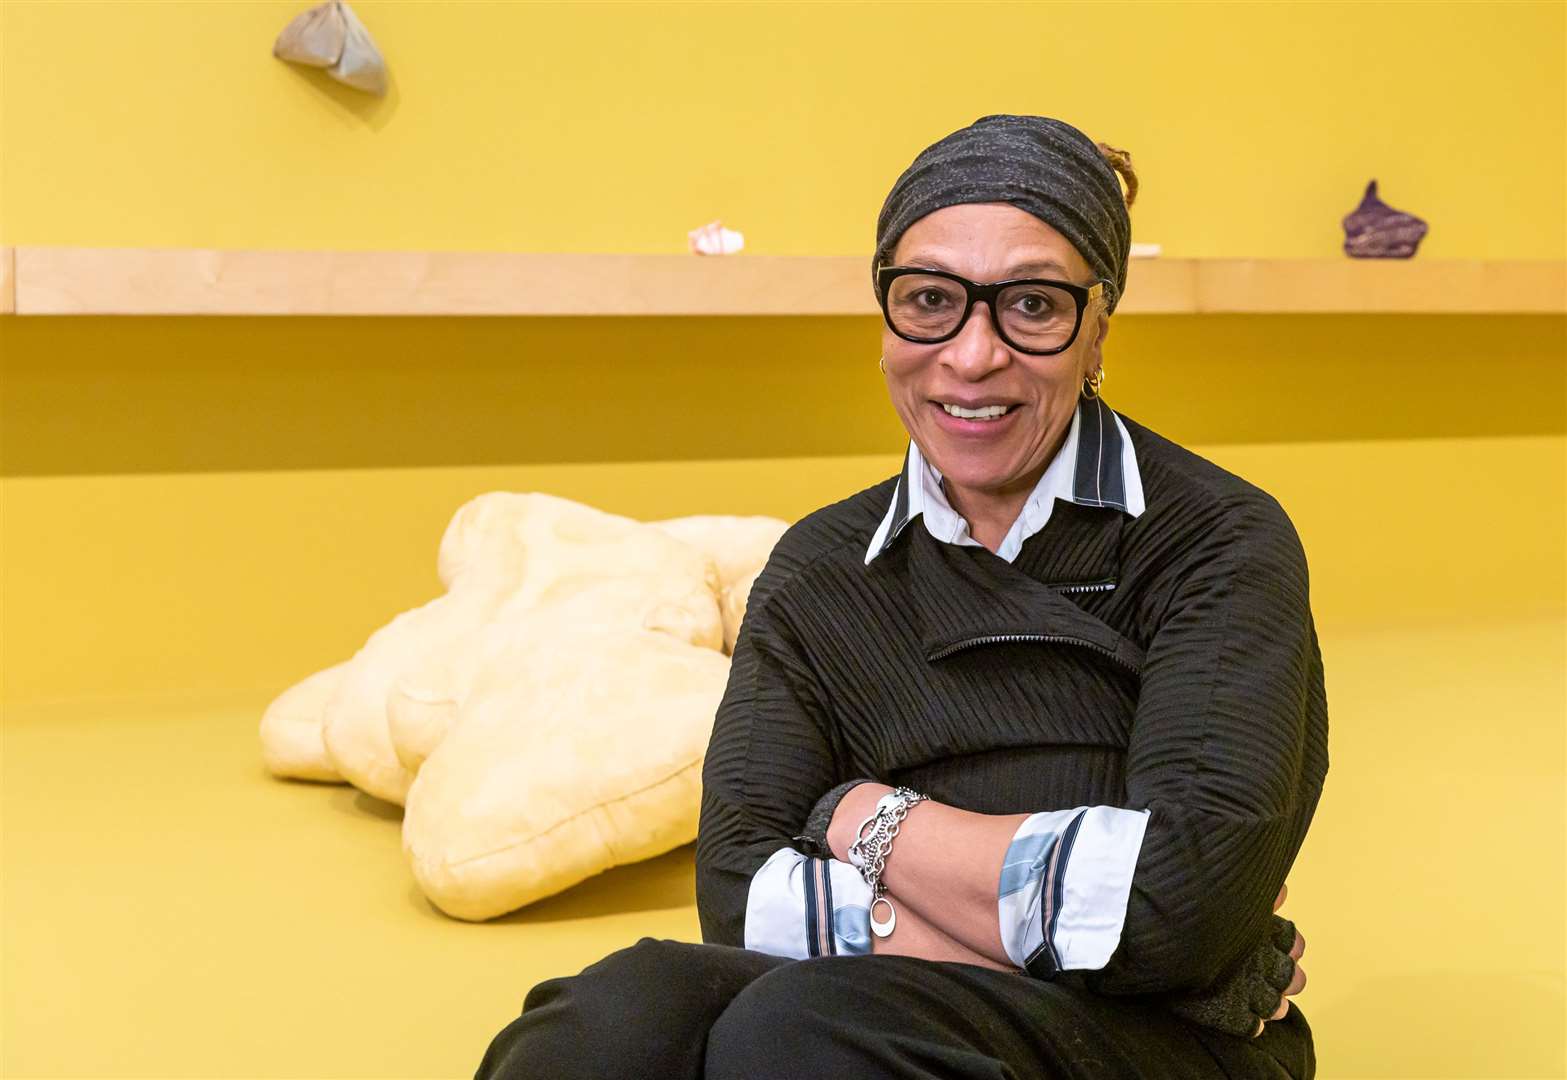 Sculptor Veronica Ryan was named the winner of the Turner Prize 2022 (Brian Roberts/Tate)